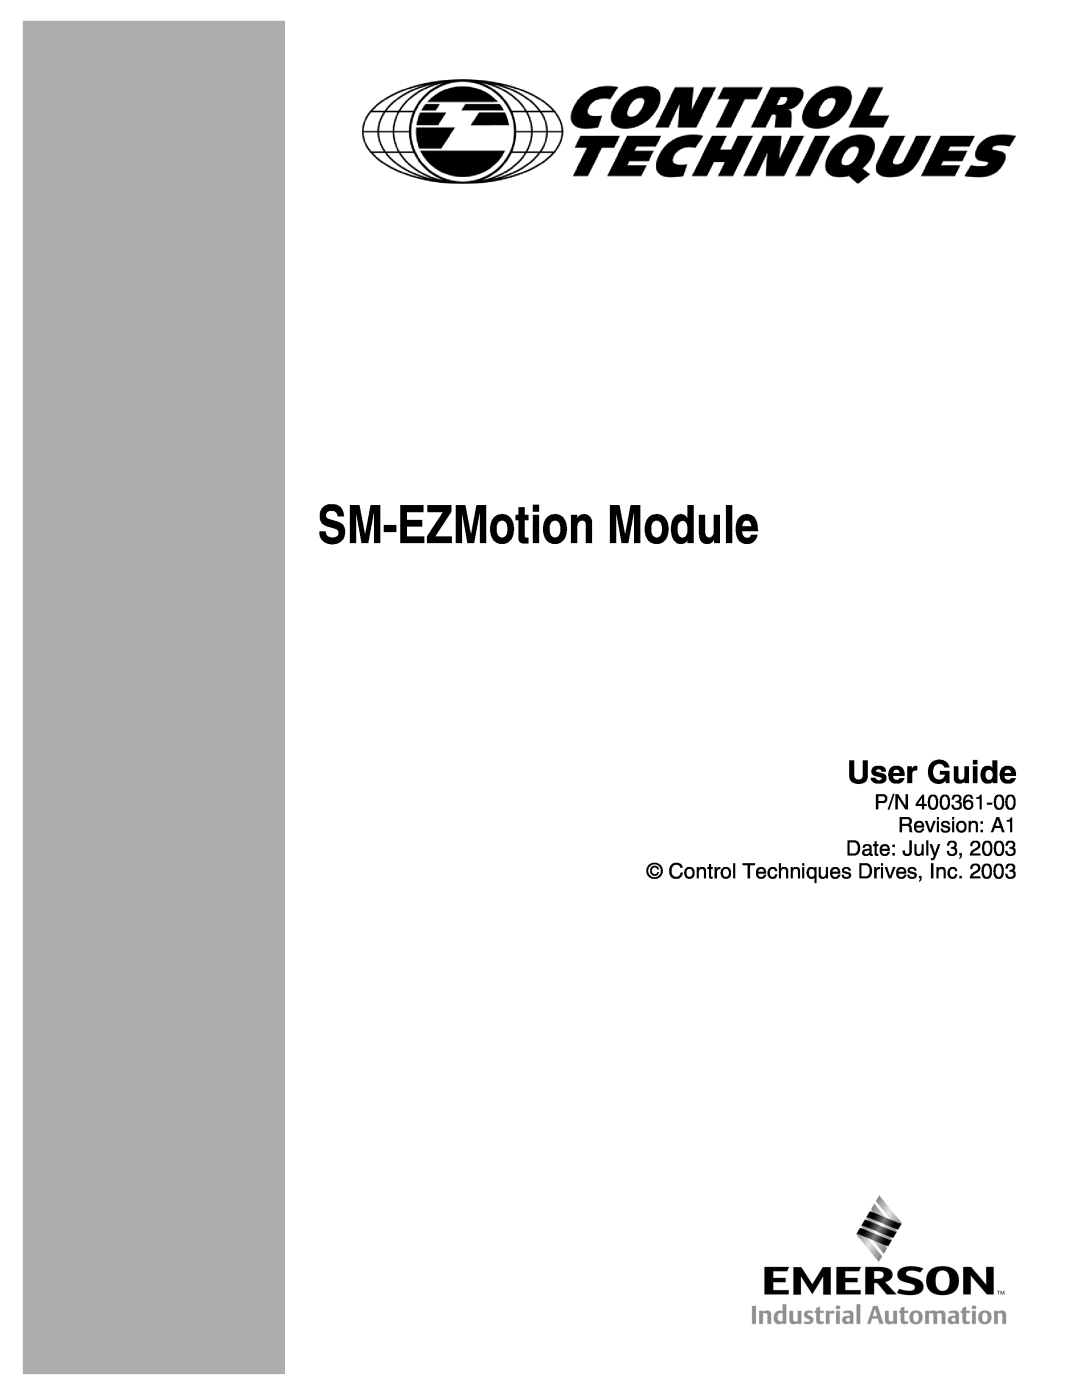 Emerson P/N 400361-00 manual User Guide, SM-EZMotion Module, P/N Revision A1 Date July 3 Control Techniques Drives, Inc 